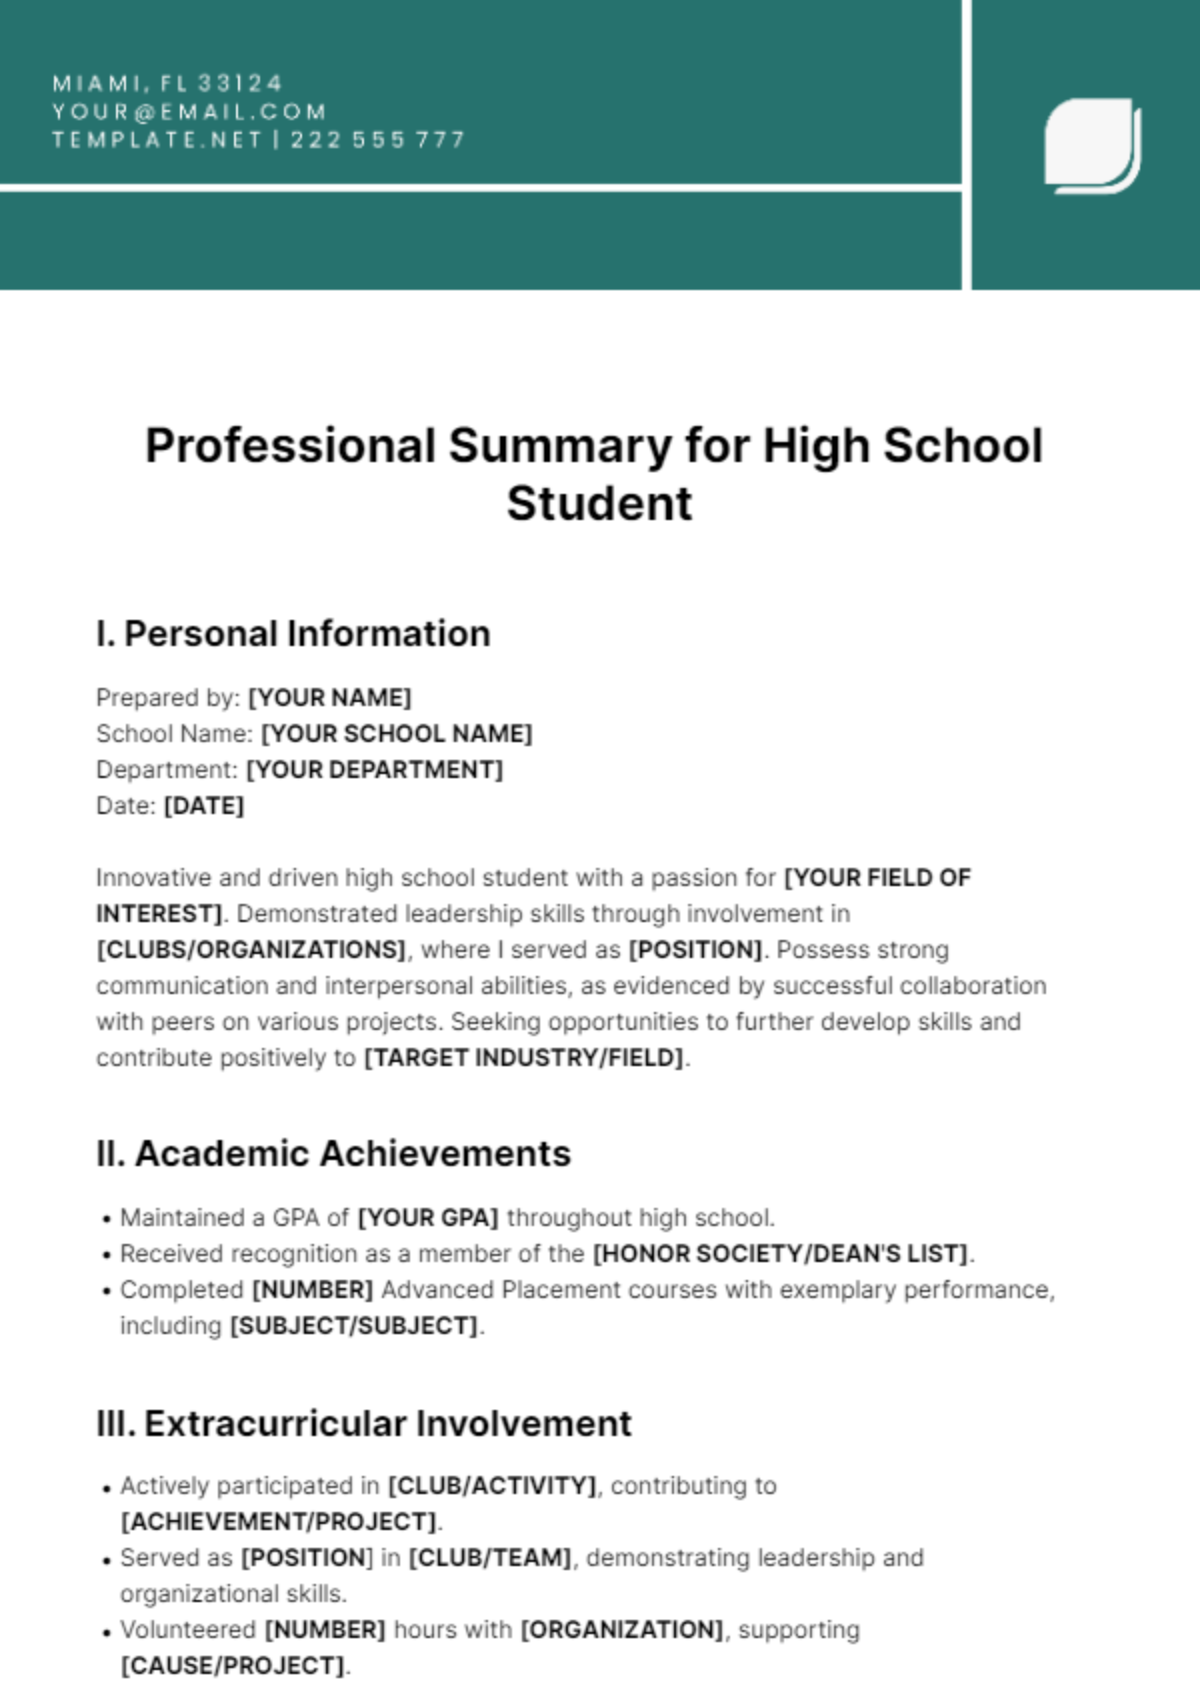 Professional Summary for High School Student Template